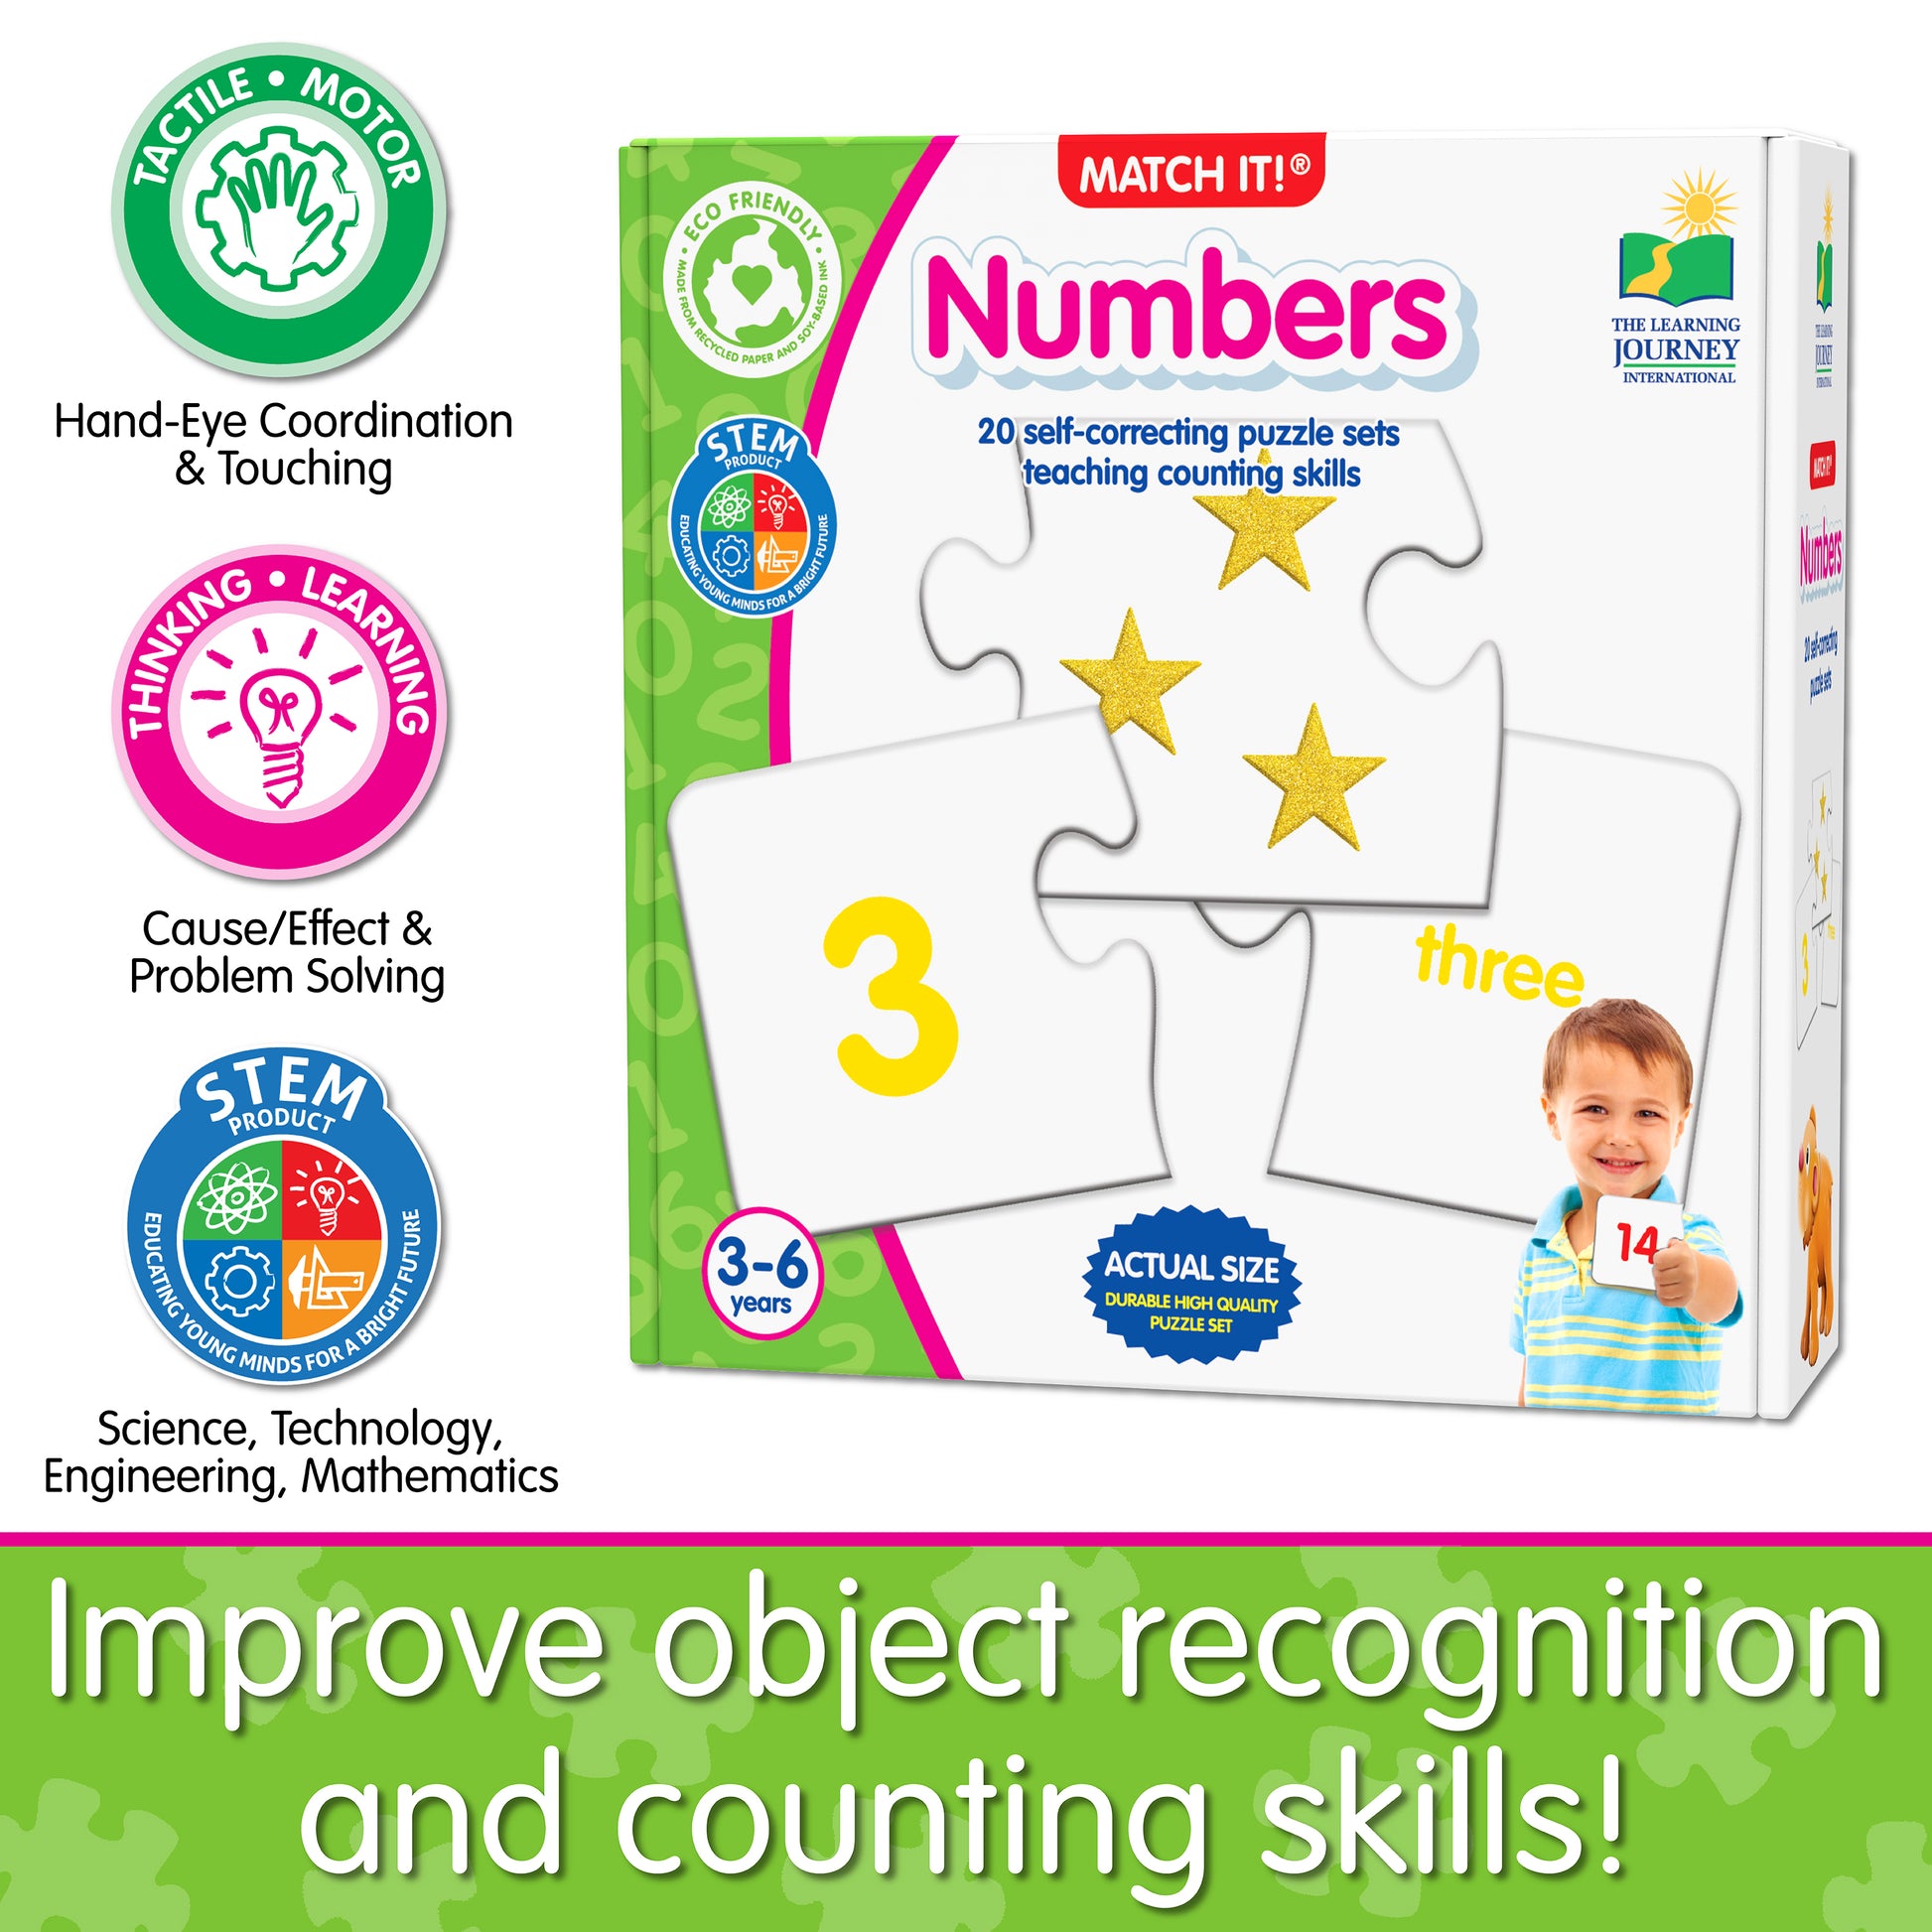 Infographic about Match It - Numbers' educational benefits that says, "Improve object recognition and counting skills!"